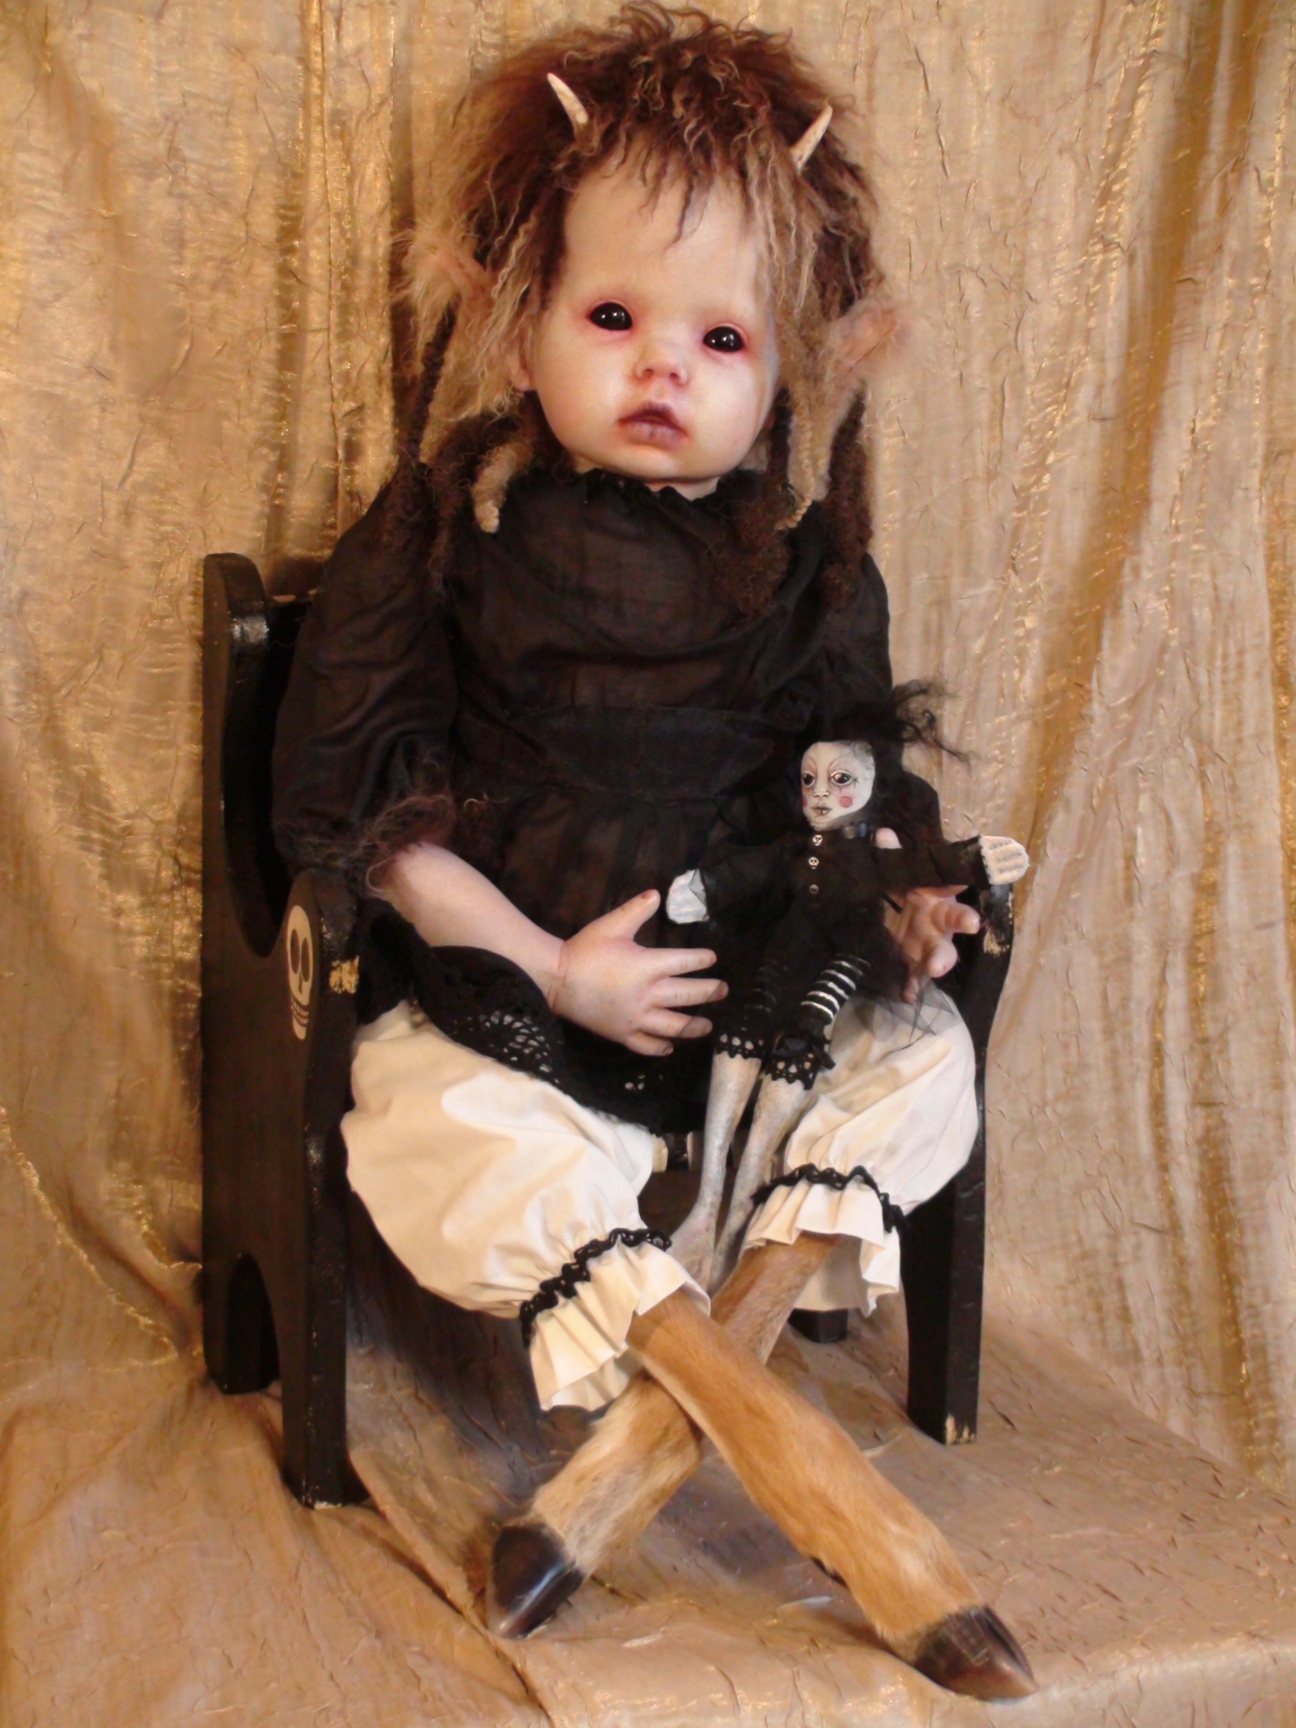 seated gothic artdoll with taxidermy deer legs she is pale with short brown hair, elf ears, horns she wears a black top and white pants and holds a little gothic cloth doll in her lap